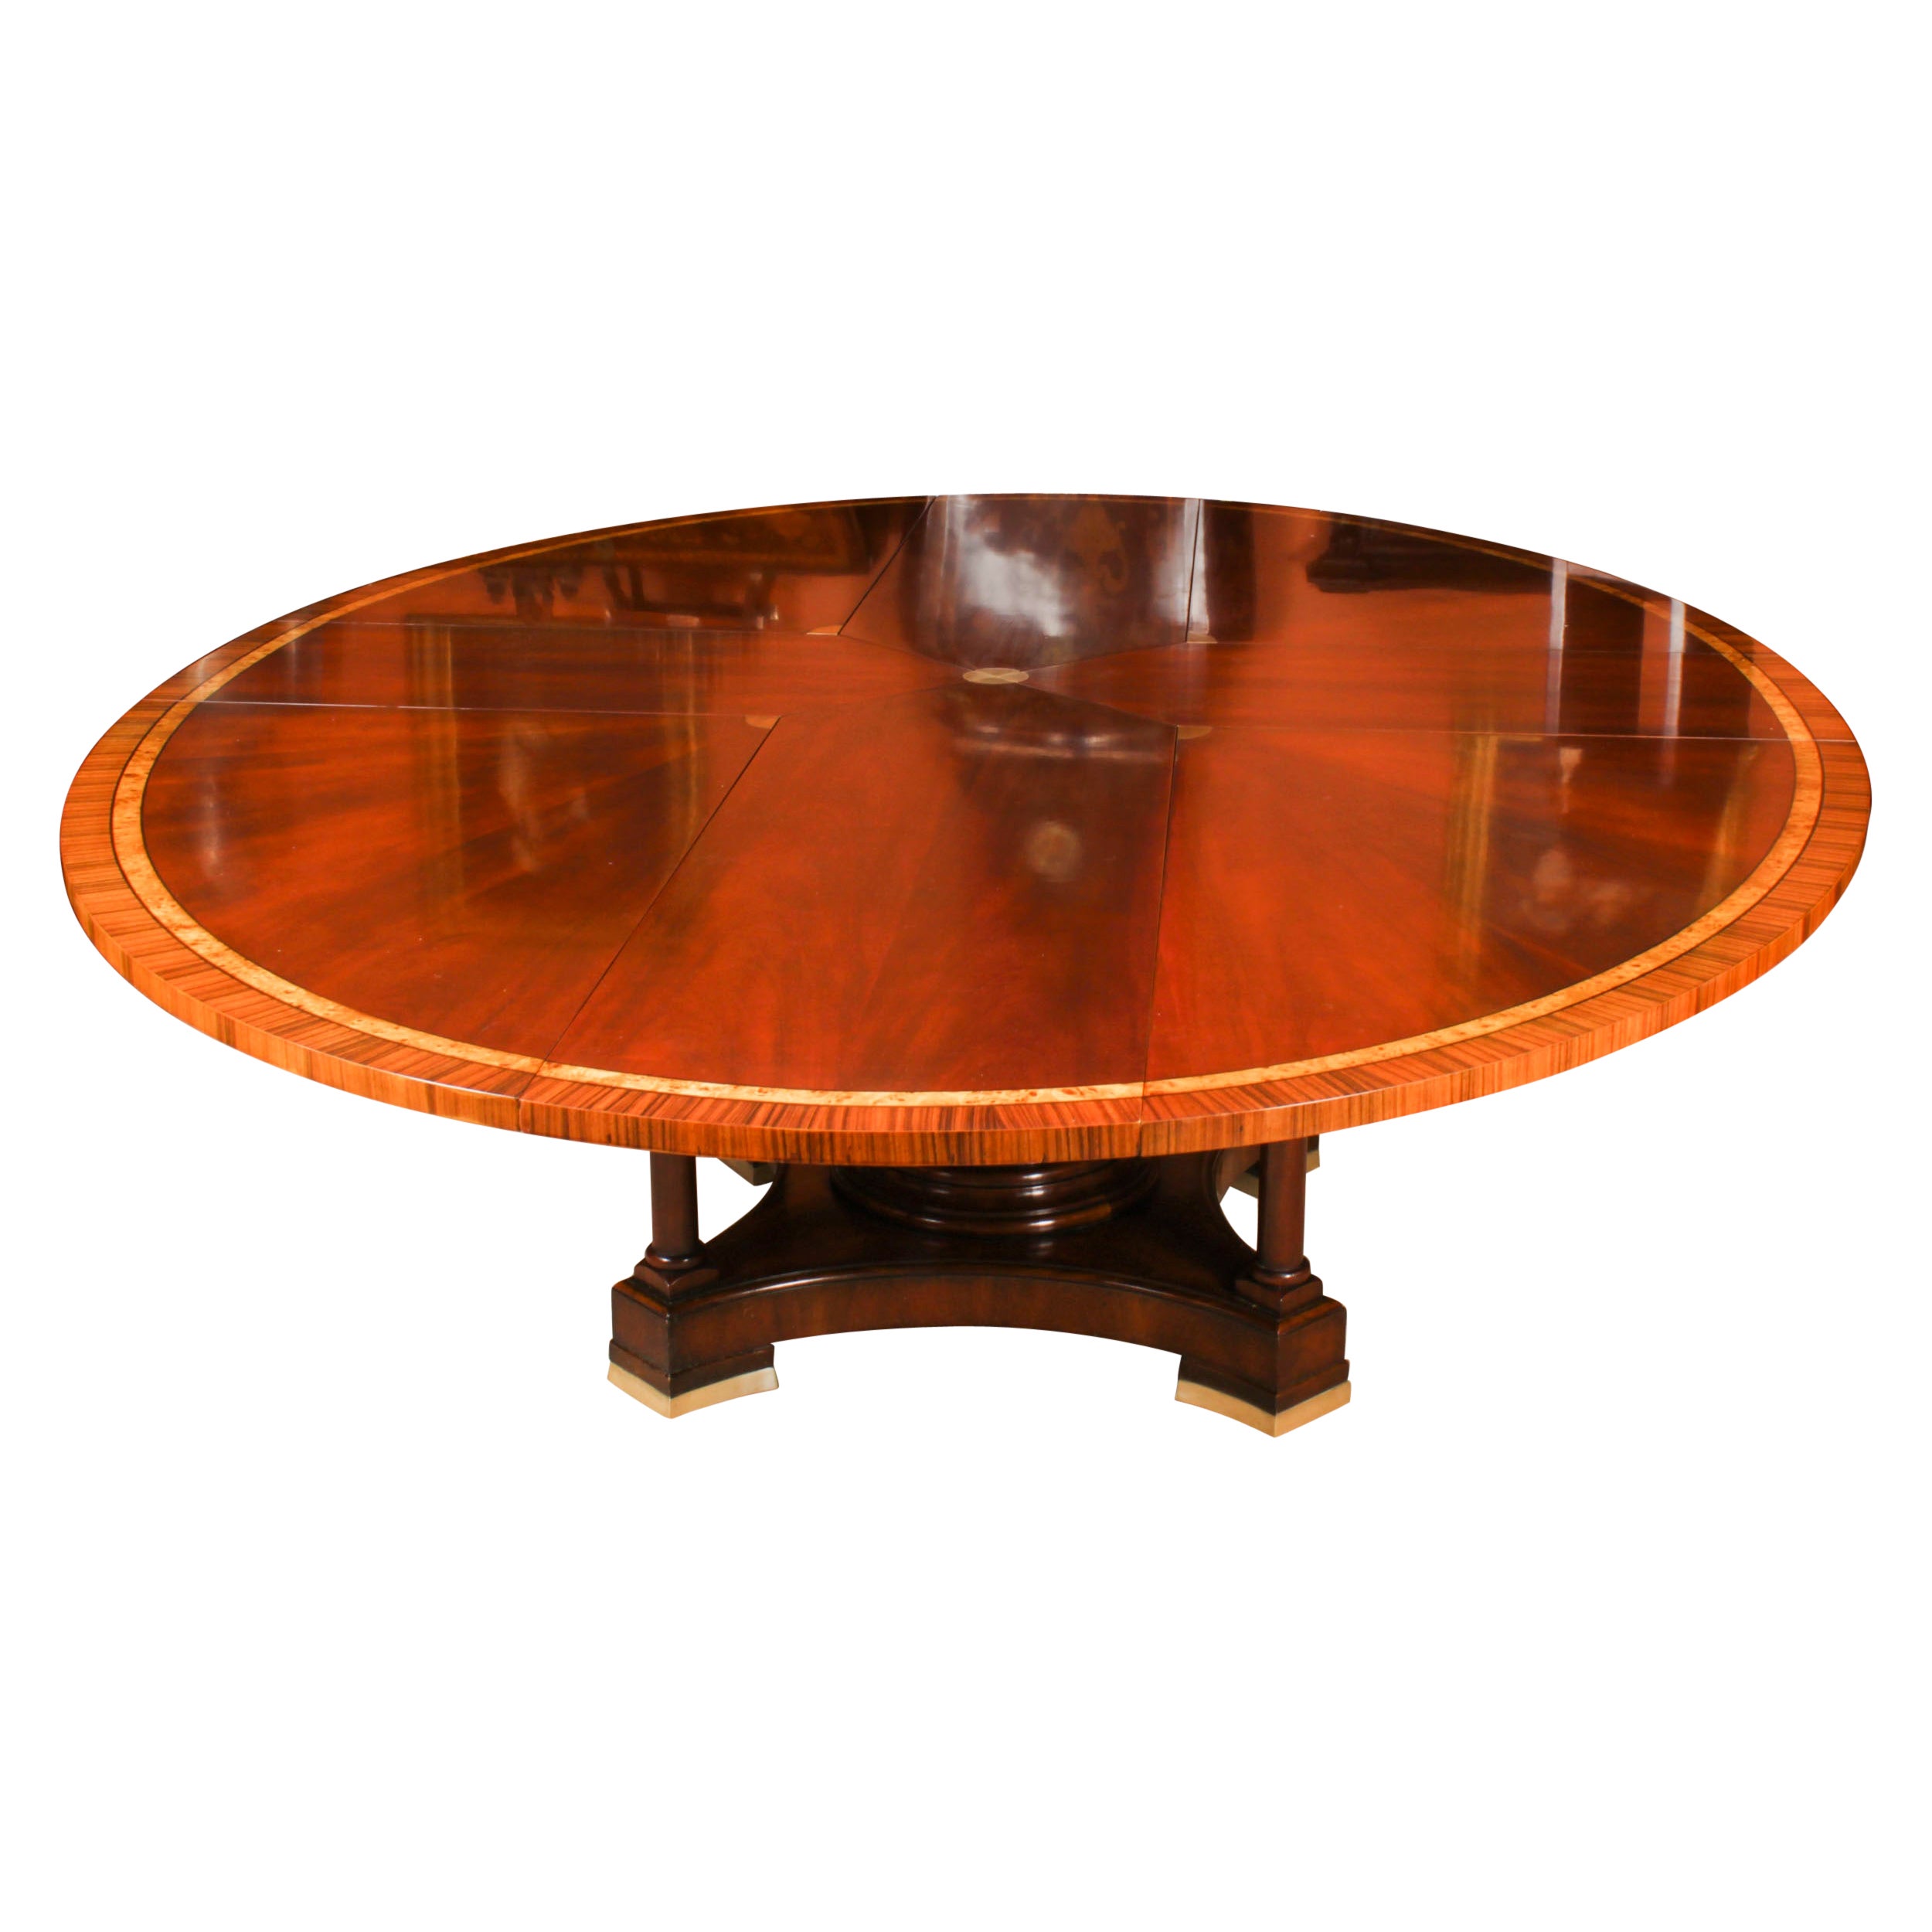 Vintage Large 9ft x 6ft3" Oval Flame Mahogany Jupe Dining Table 20th Century